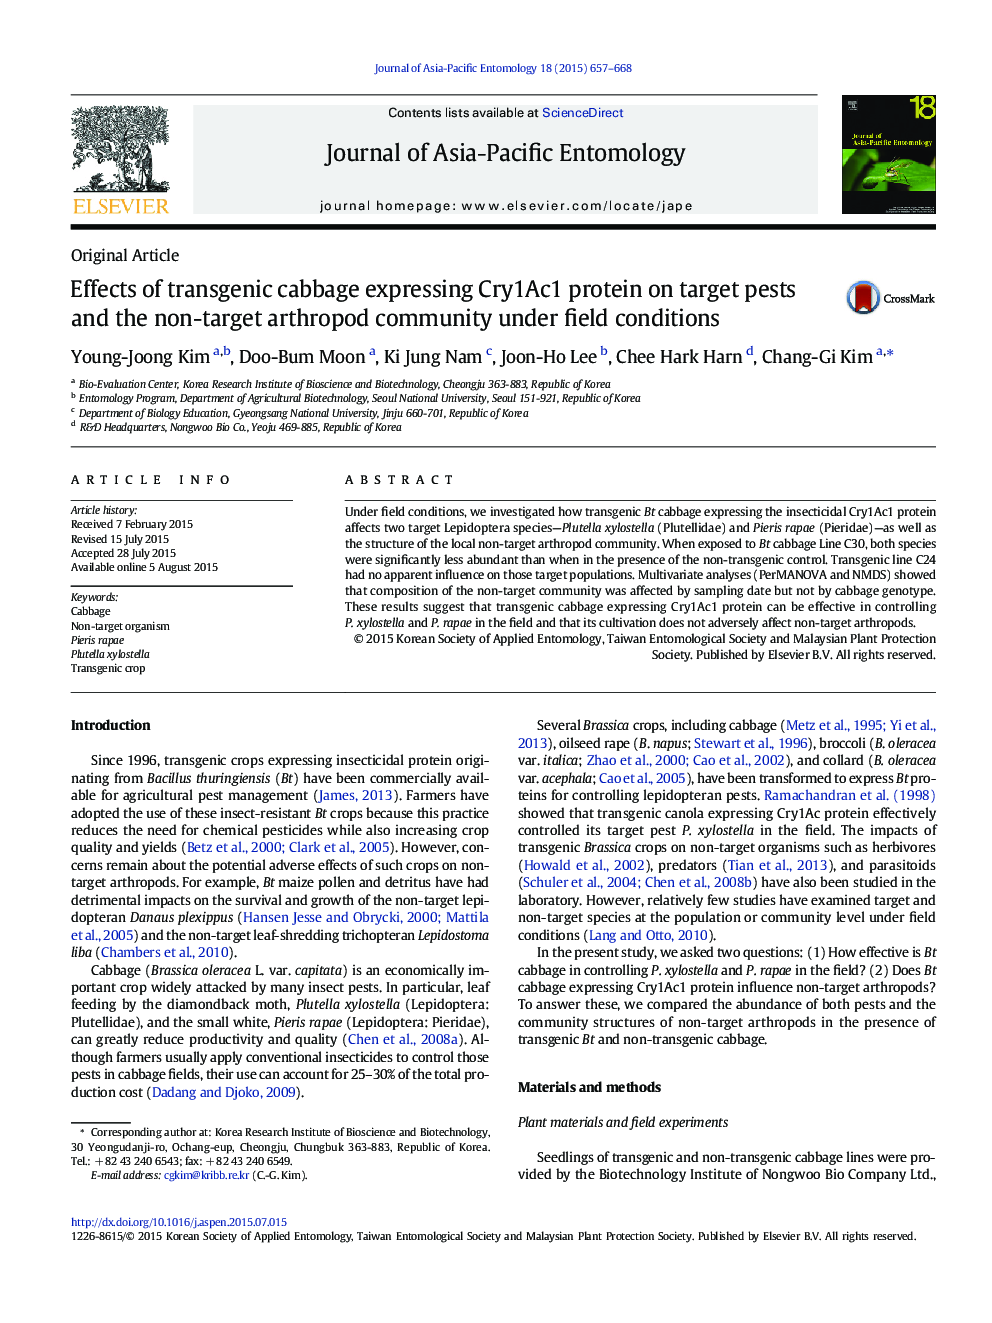 Effects of transgenic cabbage expressing Cry1Ac1 protein on target pests and the non-target arthropod community under field conditions